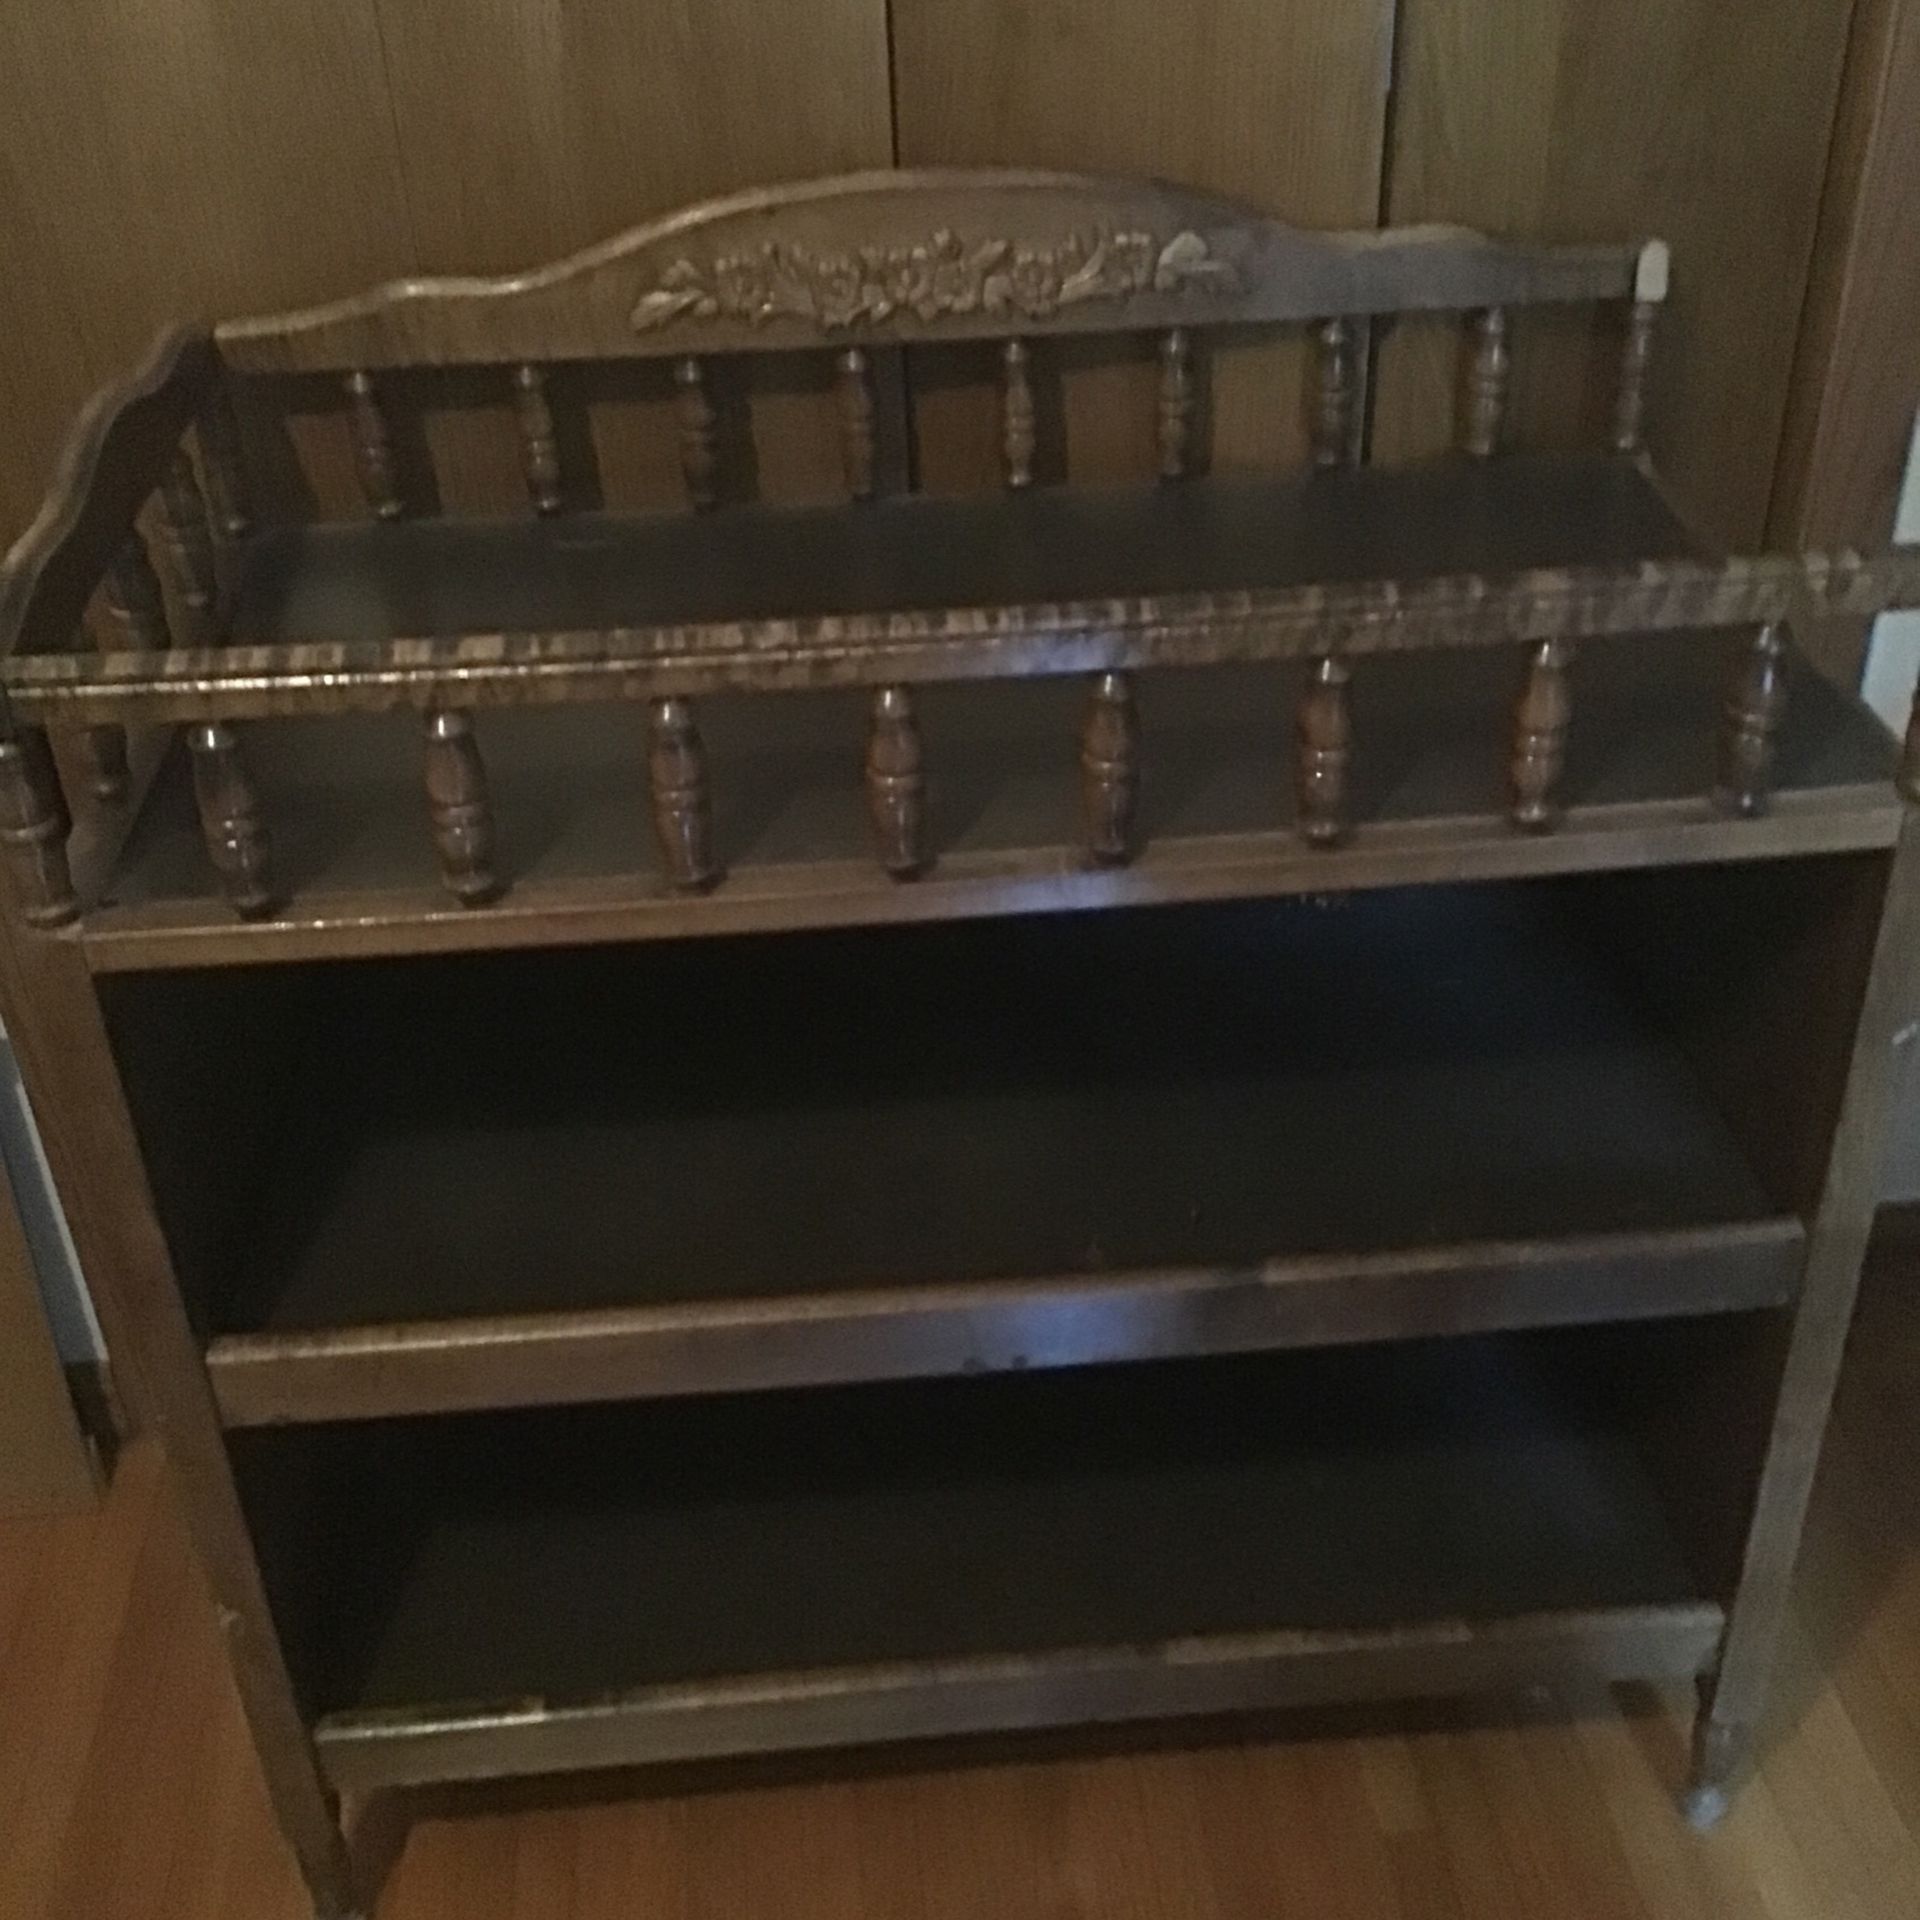 Baby Changing Table Or.. Could Be Painted And Used As… (towel Rack, Storage Cart, Ect)